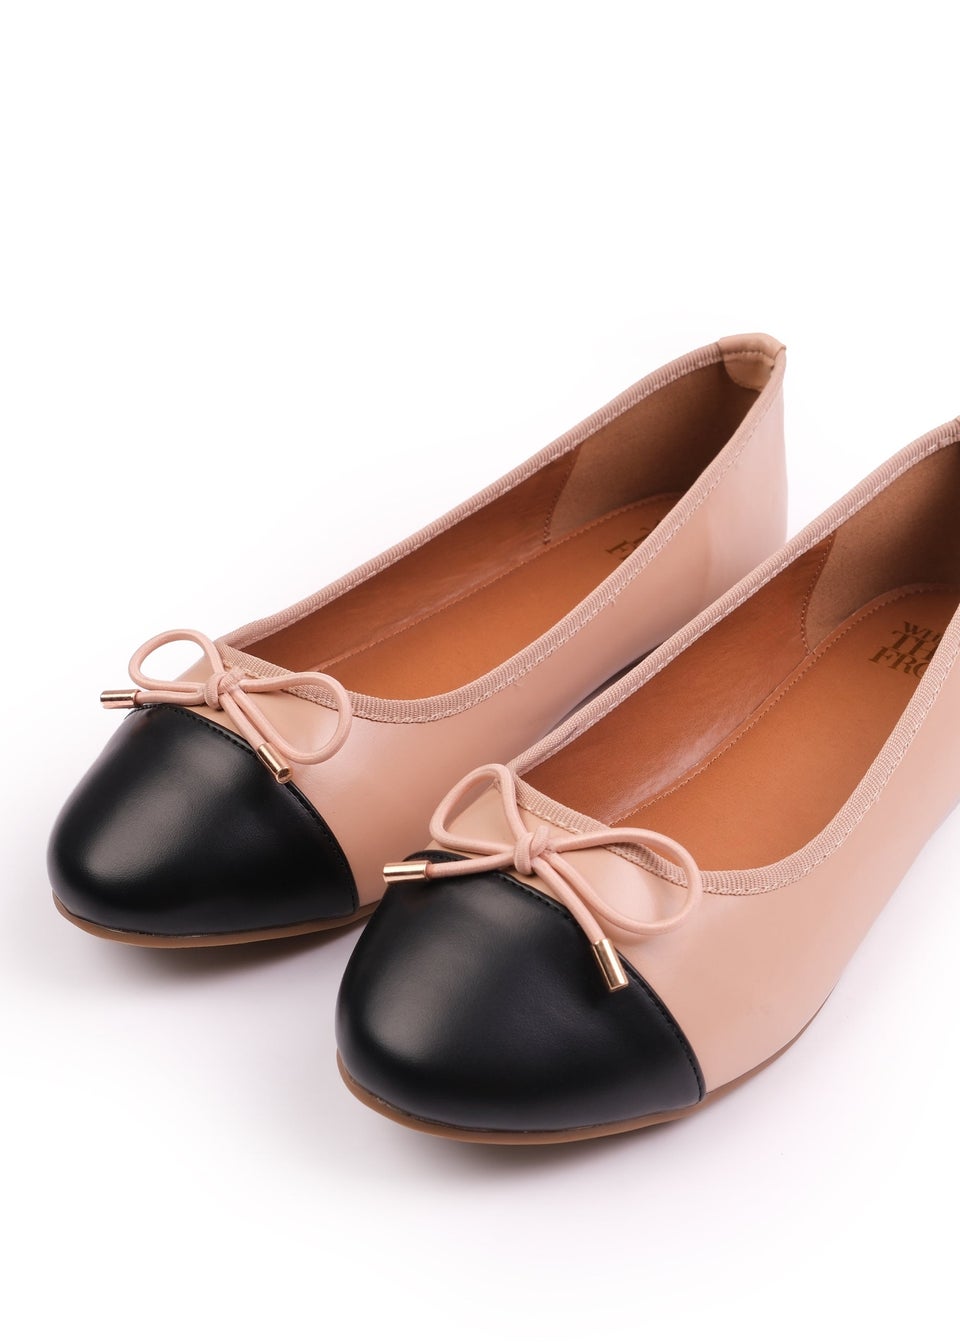 Where's That From Cream Janice Ballerina Flats With Bow Detail